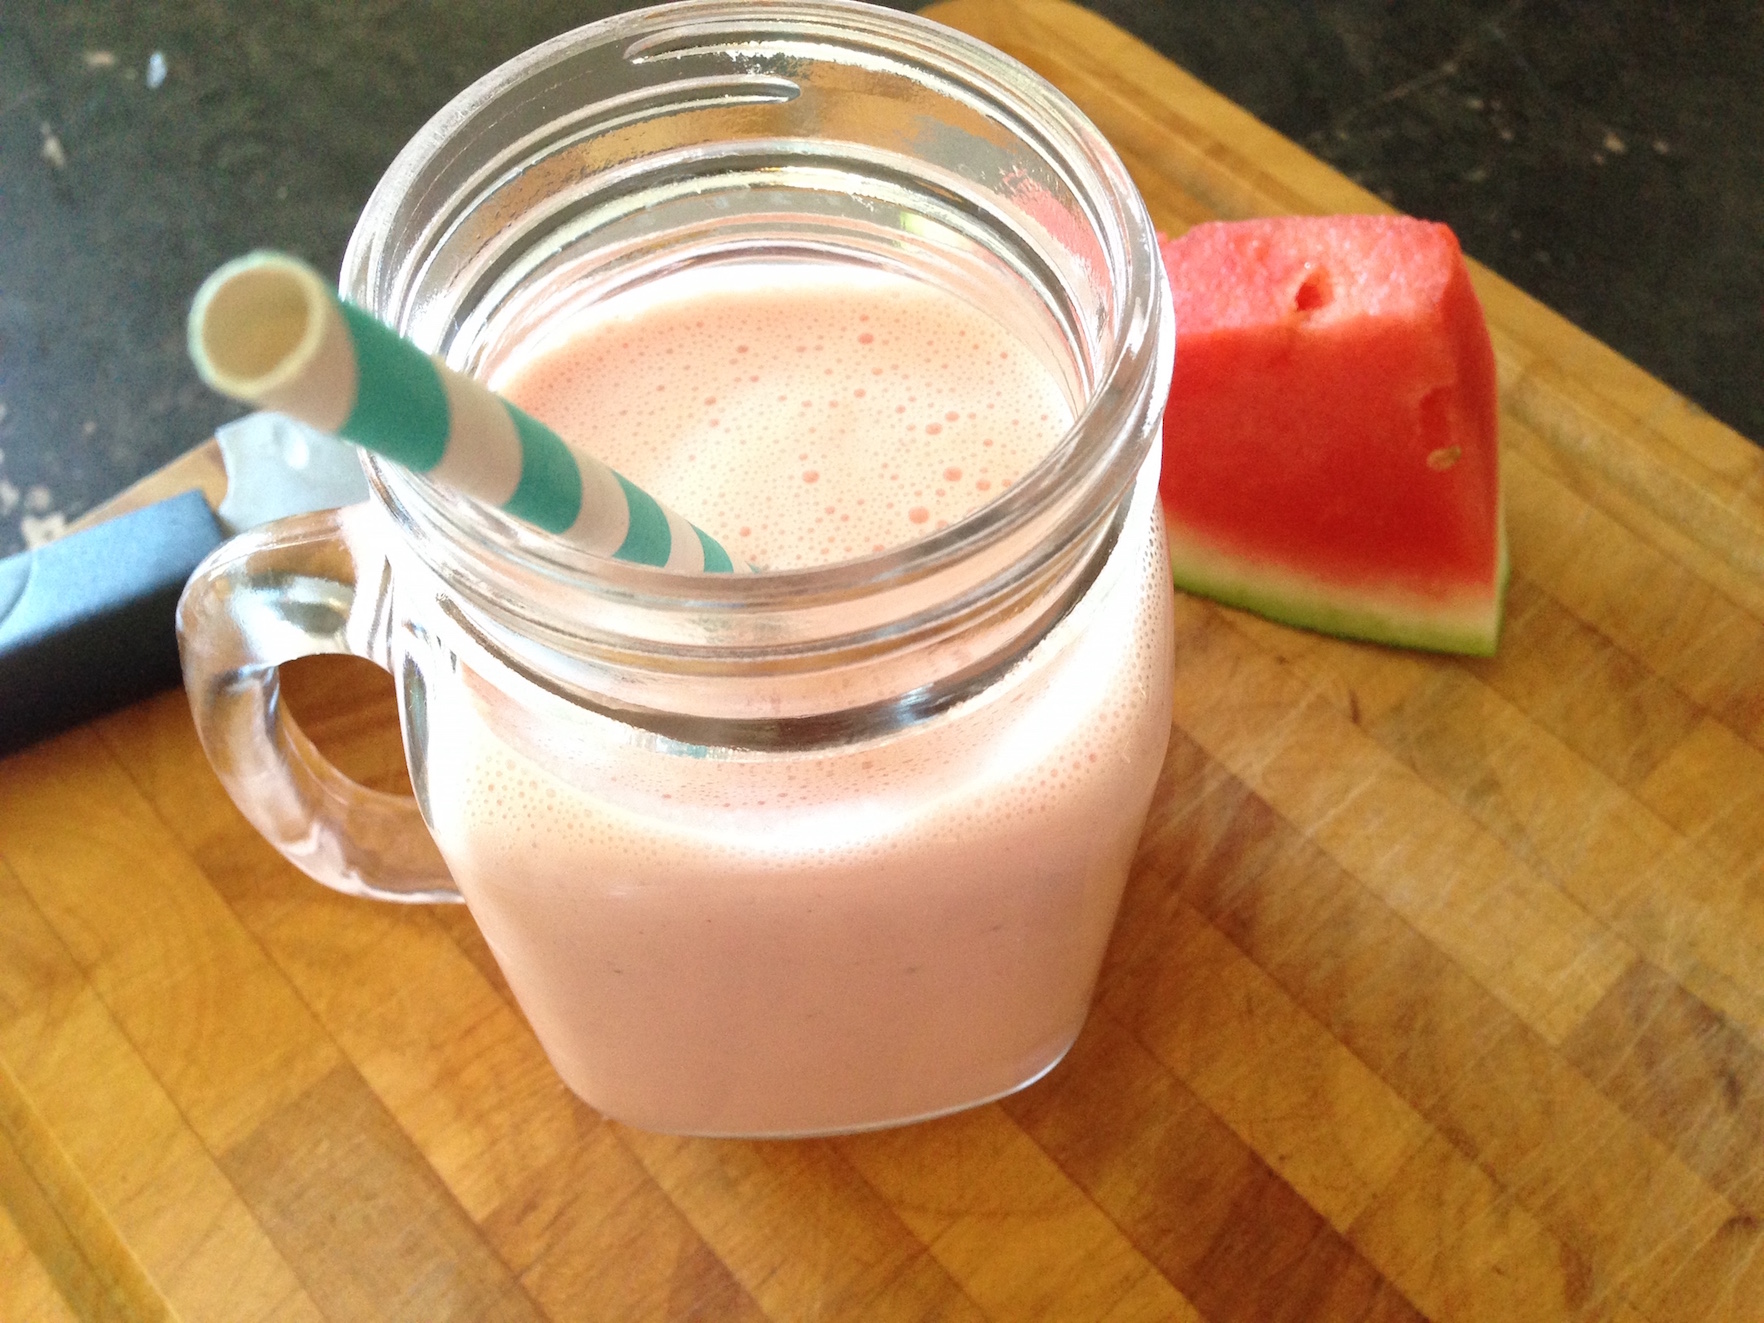 Post workout strawberry watermelon smoothie with yoghurt